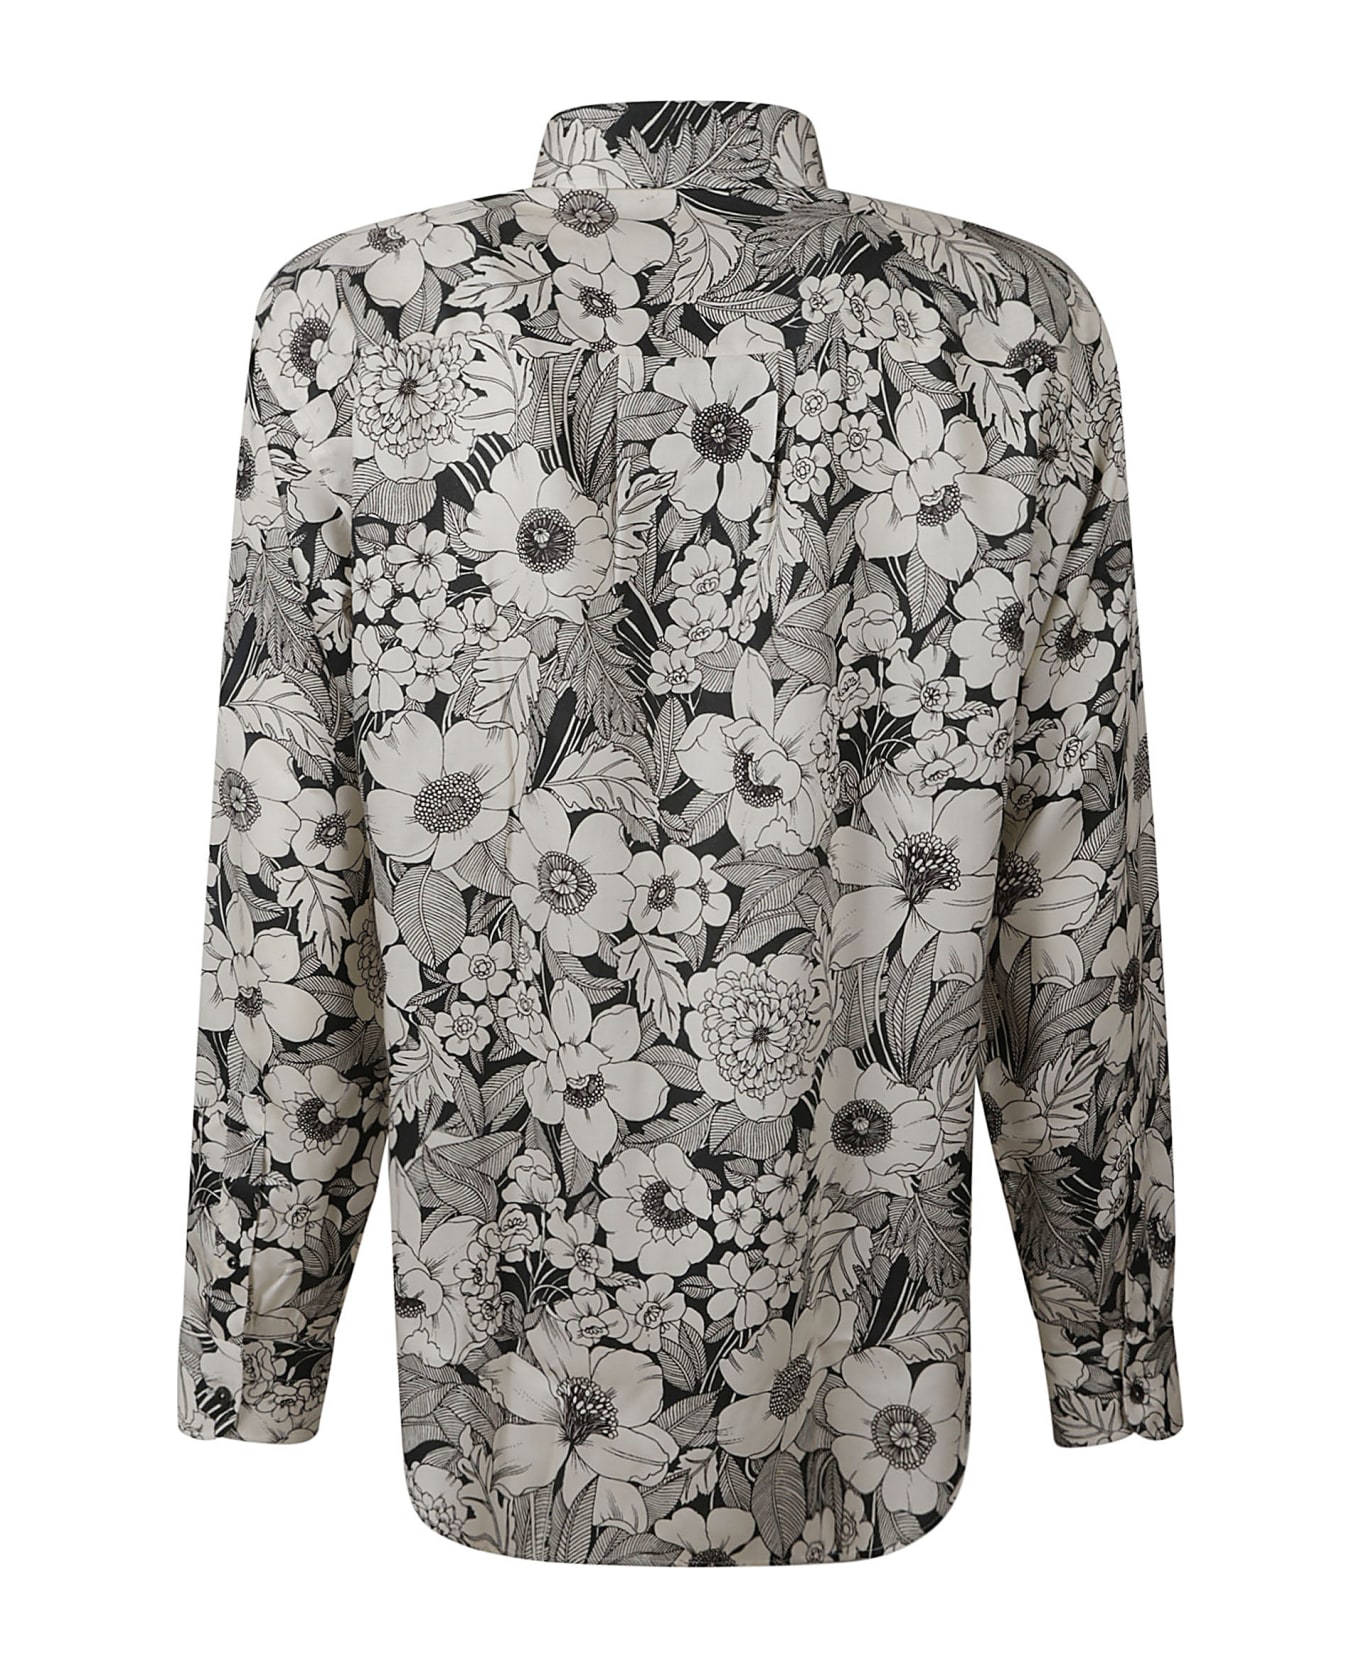 Tom Ford Floral Printed Shirt - Combo White/Black シャツ